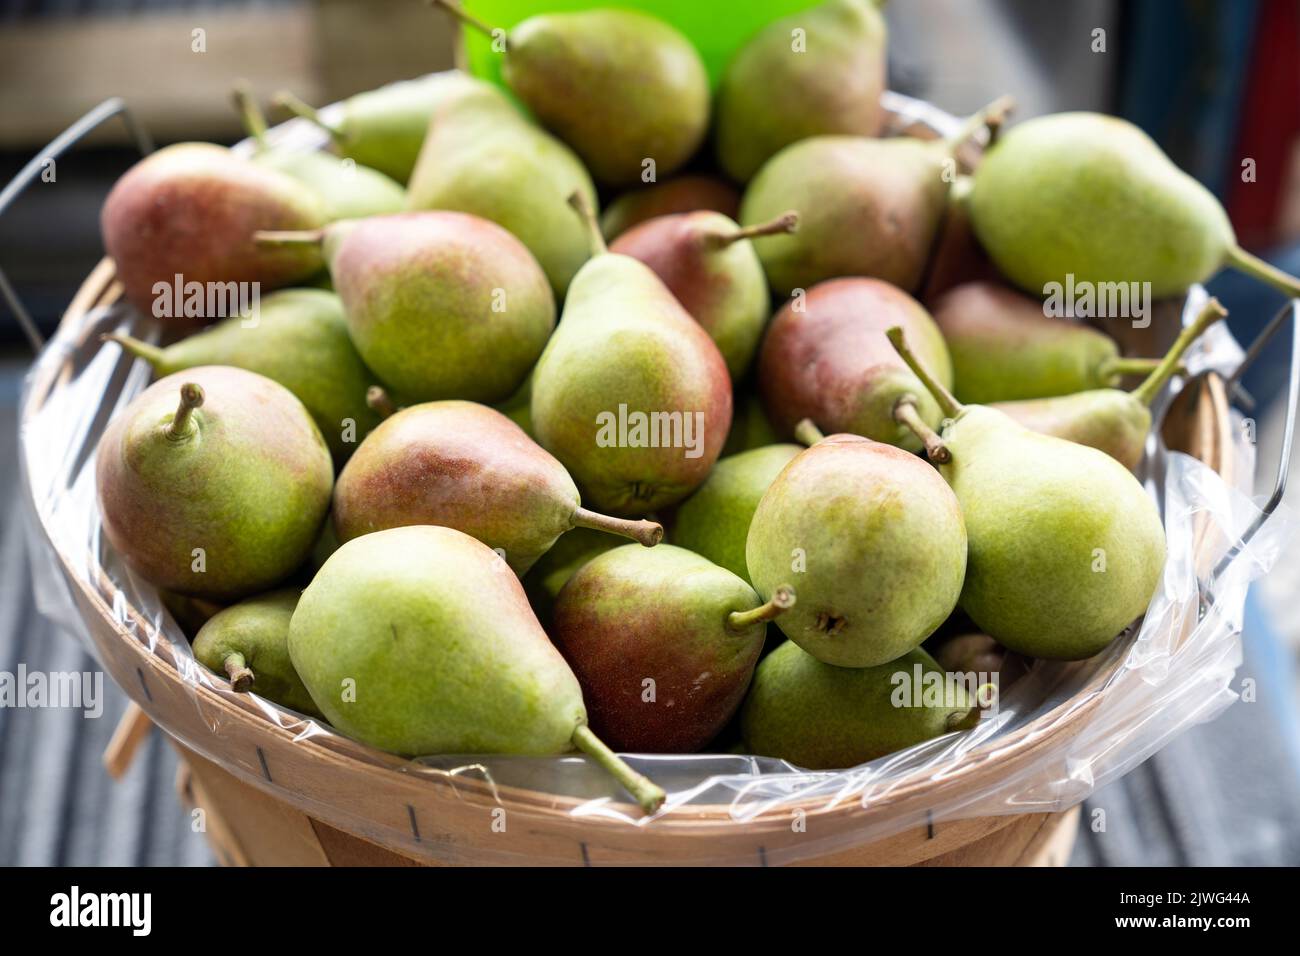 Basket of pears Stock Photo